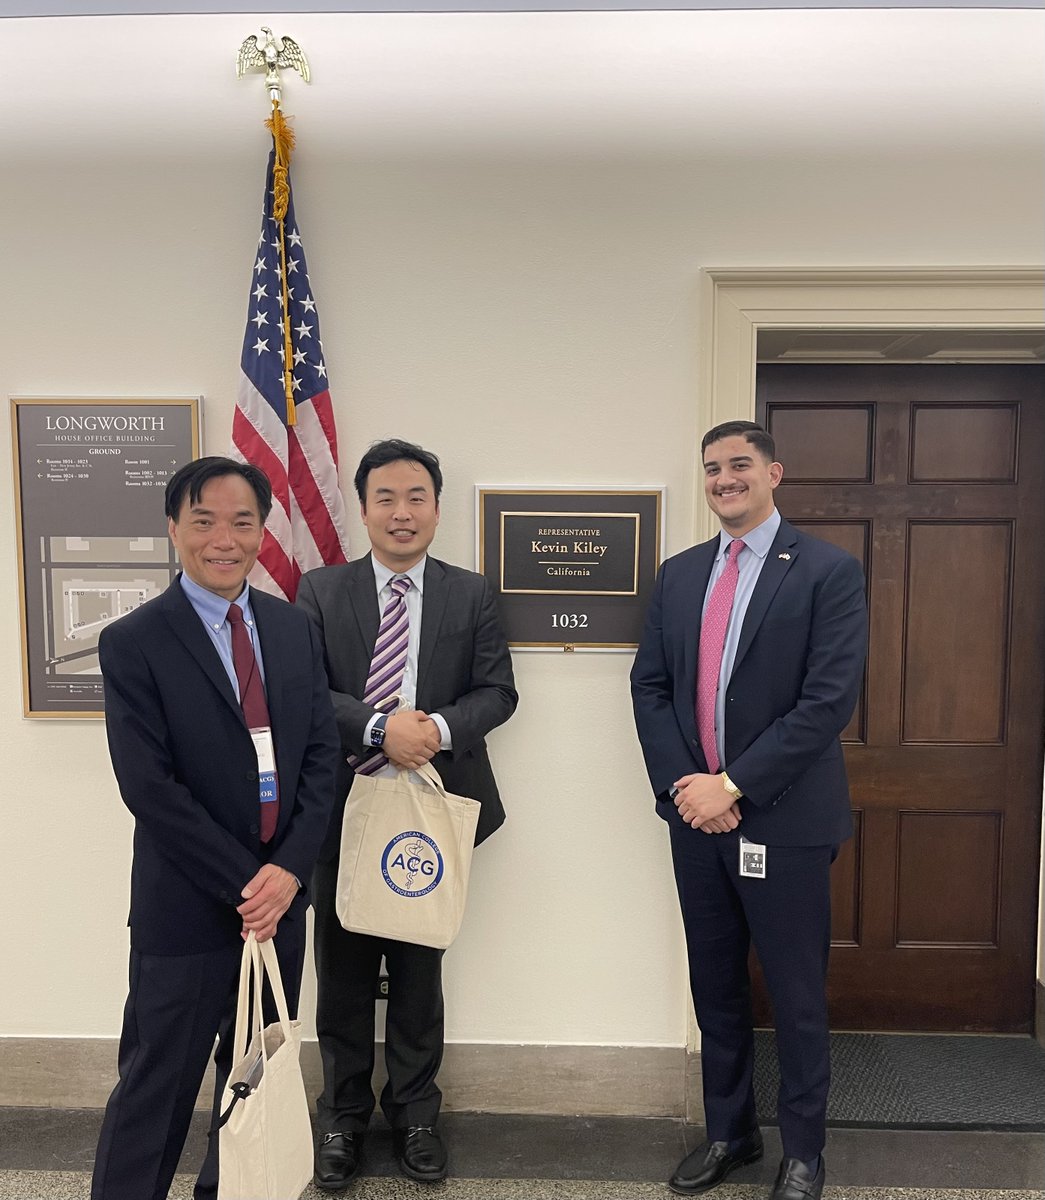 Thank you @AmCollegeGastro a productive #ACGAdvocacyDay2023 @RepThompson  @SenAlexPadilla @KevinKileyCA @DorisMatsui 
🔑The Safe Step Act S.652/H.R.2630
🔑Inflationary Update to Medicare Physician Payments H.R. 2474
🔑Efforts to Reform/Restrict Prior Authorization #FixPriorAuth